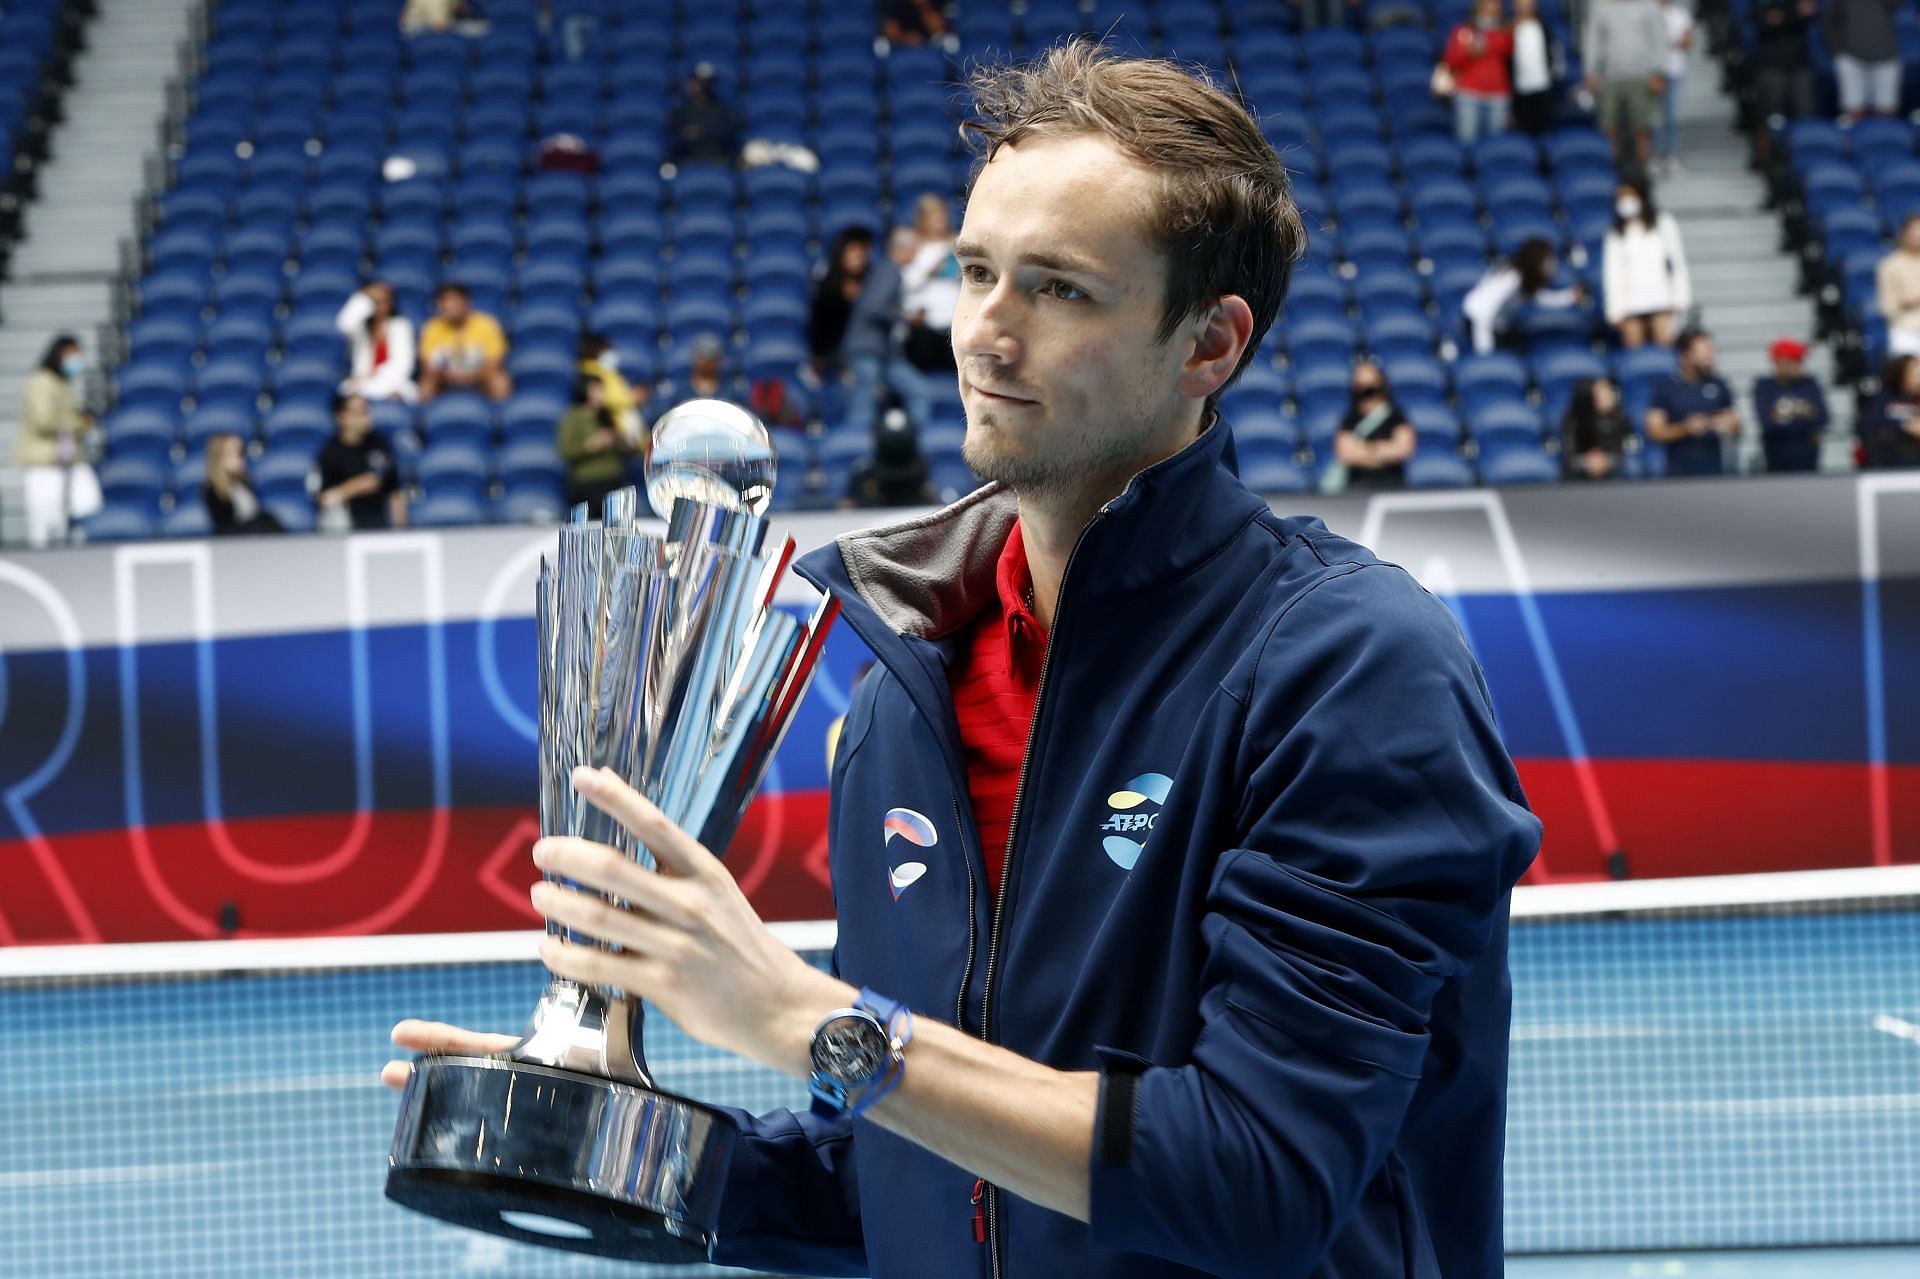 Daniil Medvedev holds the ATP Cup trophy after Russia won the 2021 edition of the event.